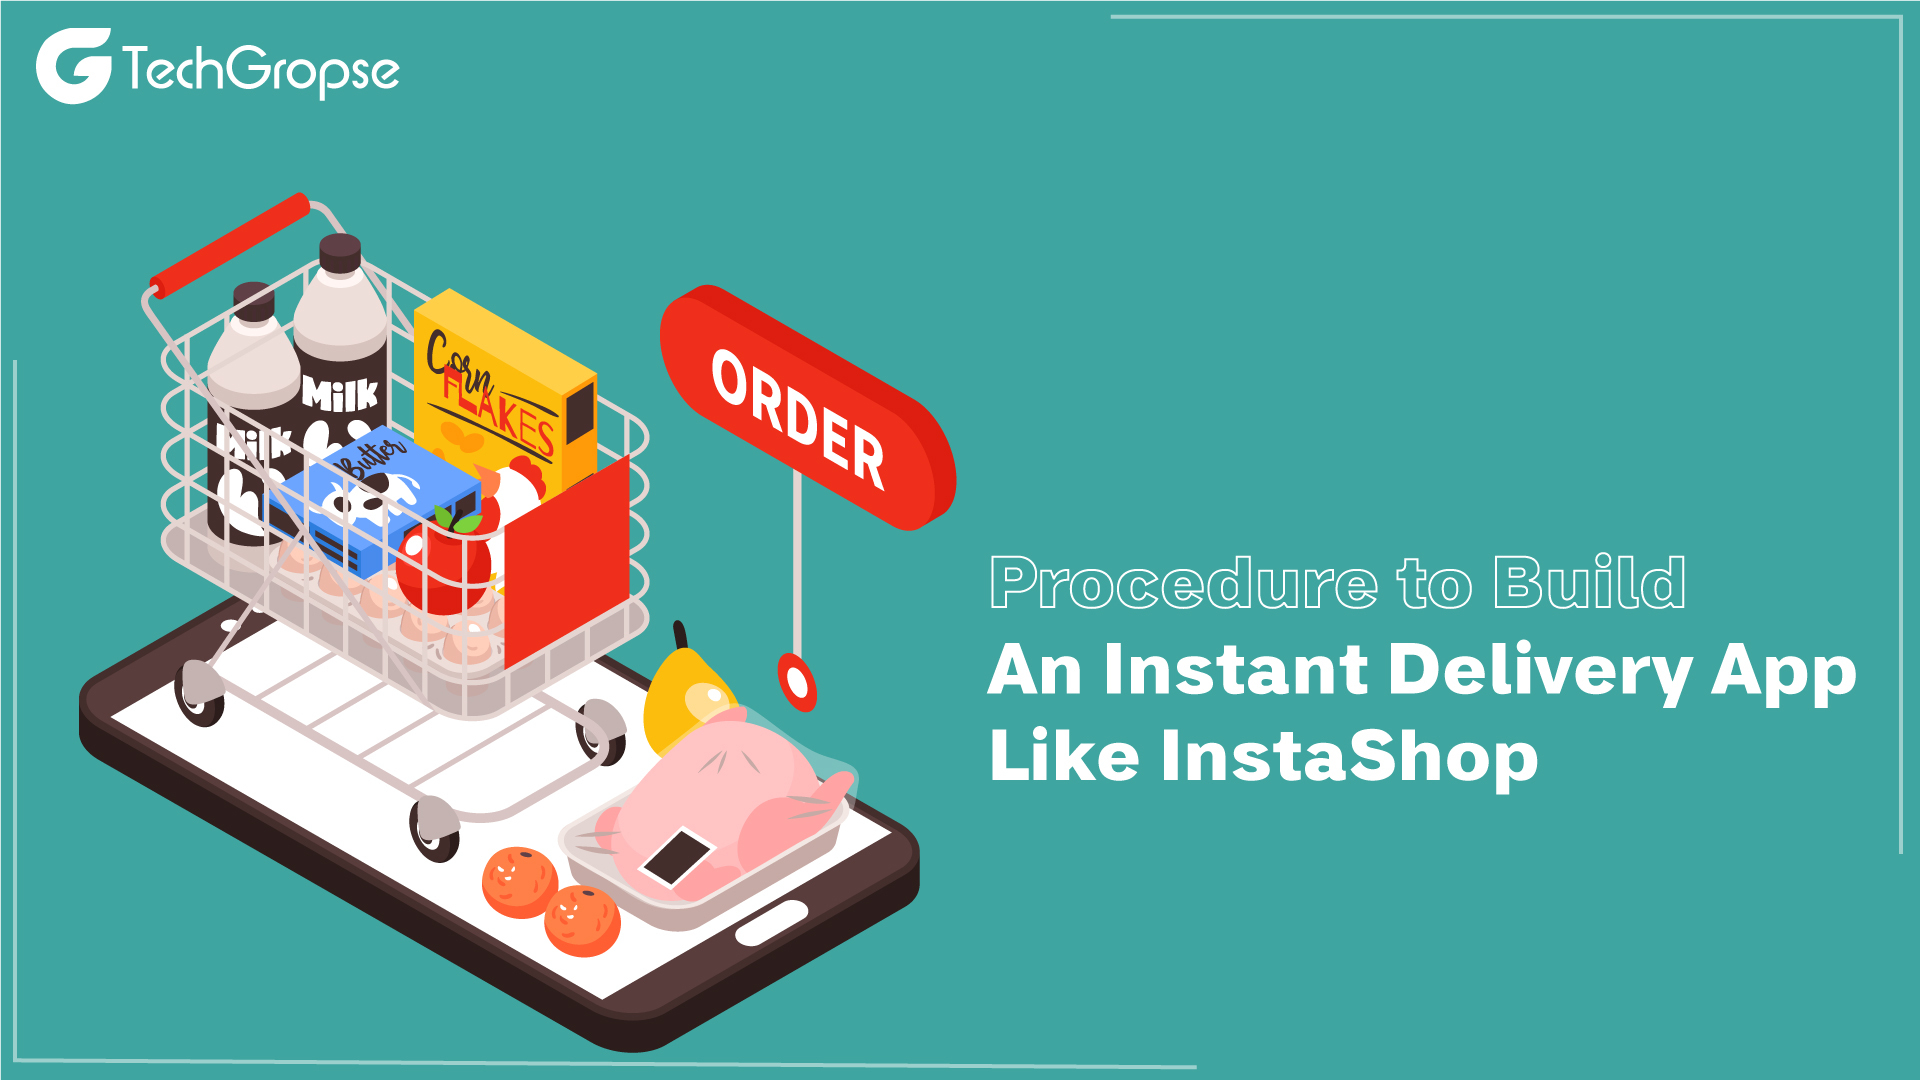 Complete the Procedure to Build An Instant Delivery App Like InstaShop